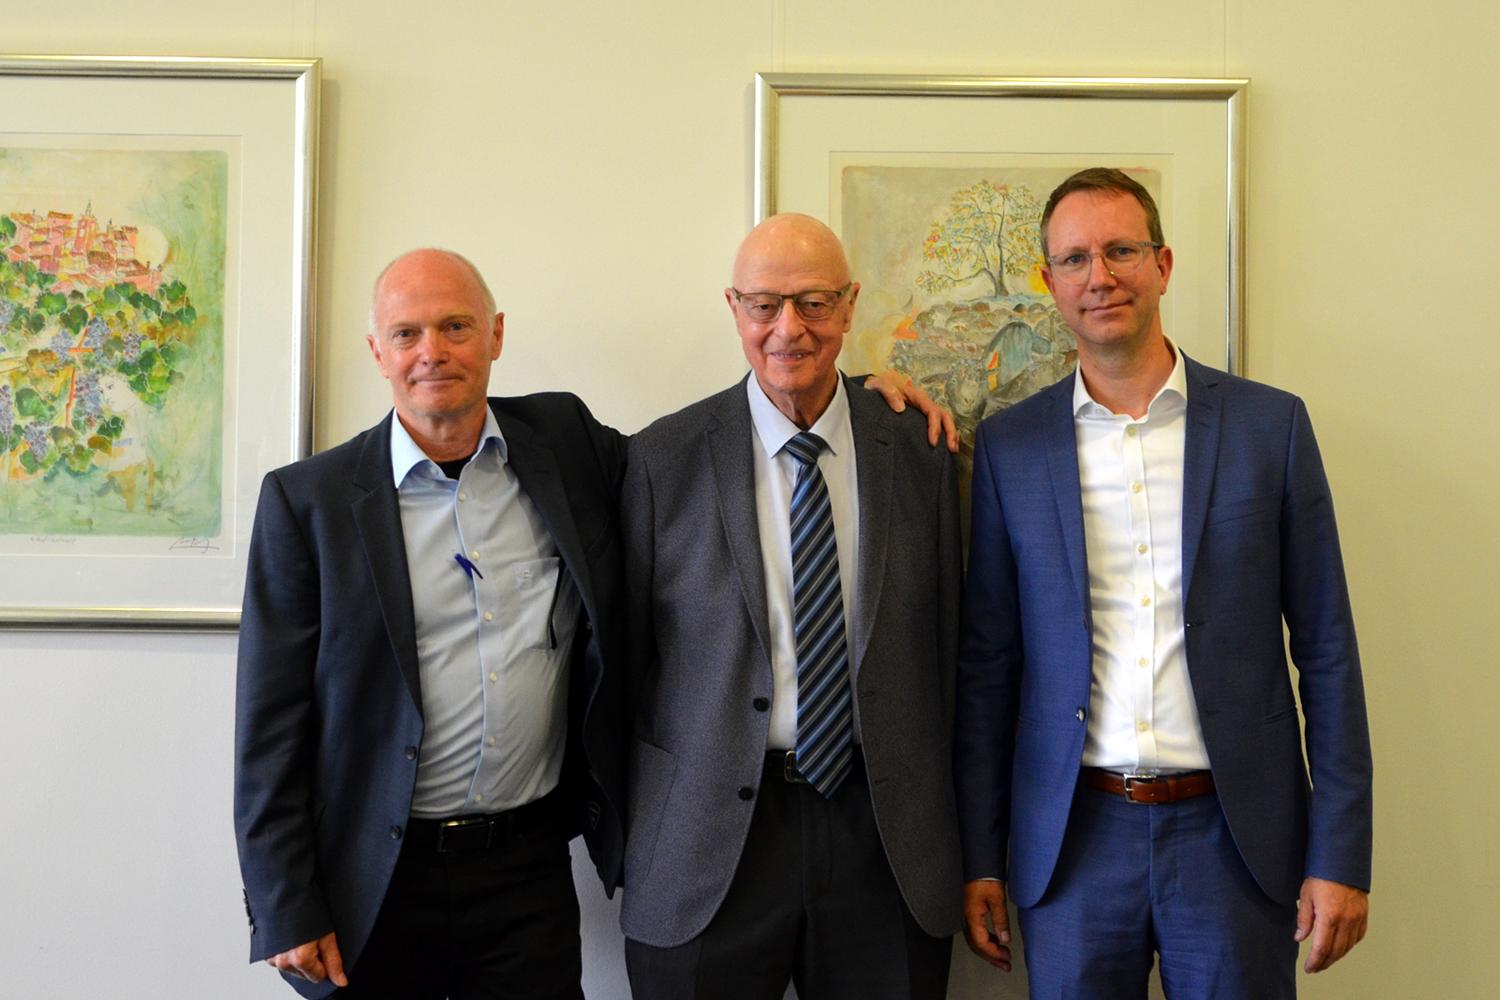 Three generations of managing directors of the international Church: Erich Senn, Peter Angst, and Frank Stegmaier